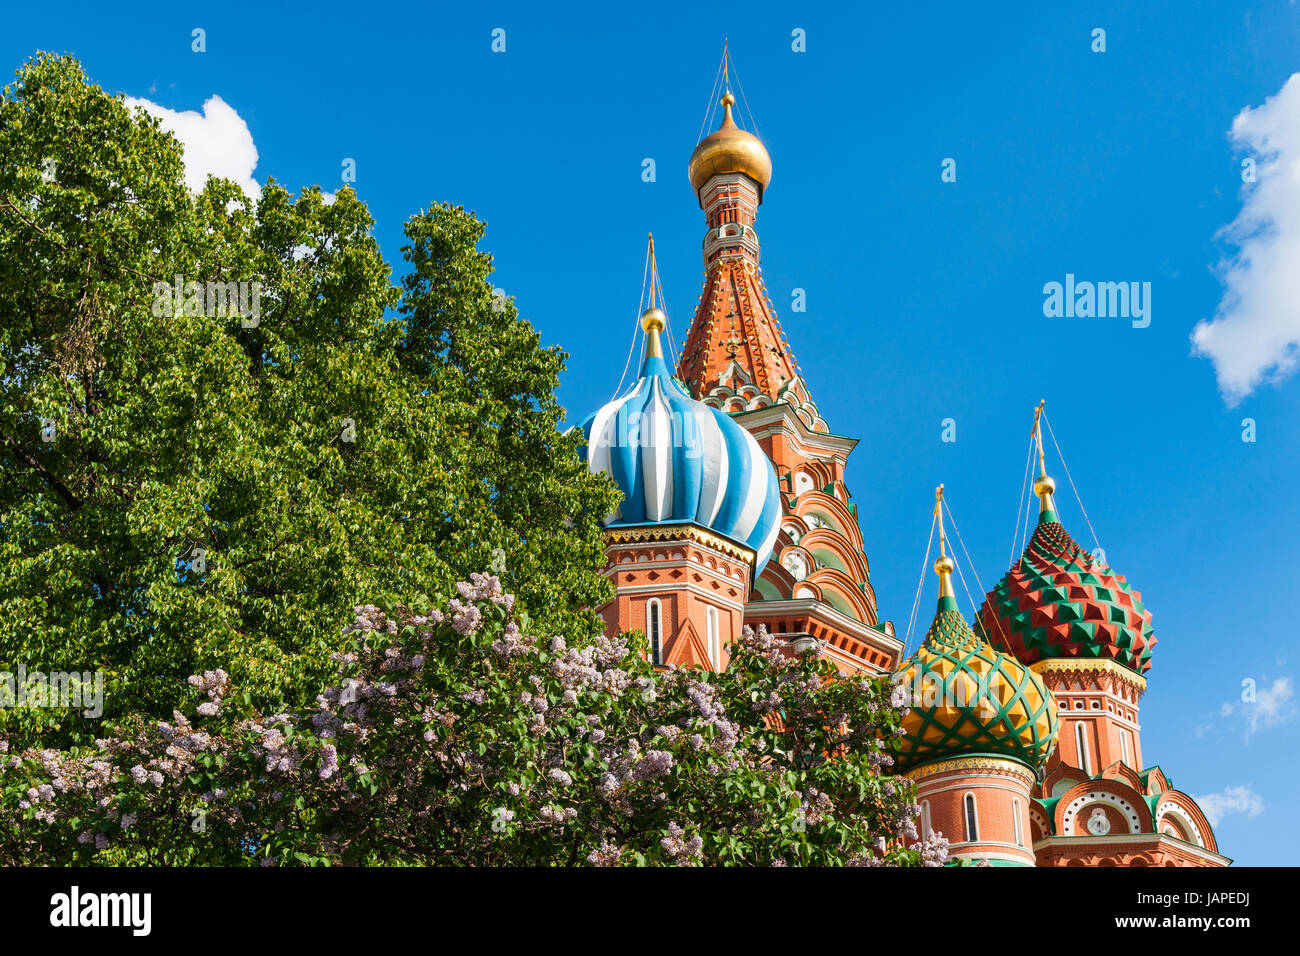 Russian Weather, Moscow. Wednesday, June 7, 2017. After a sequence of cold, rainy and even snowy days, sunny and warm day today in Moscow. The temperature is about +20C (68F). The lilacs blooming period is at least two weeks late this year because of cold spring. Red Square, Spassky (Savior's) tower and St. Basil's cathedral under the blue skies and sun rays. Some unusual visitor of Red Square also welcomes the summer warmth. Credit: Alex's Pictures/Alamy Live News Stock Photo